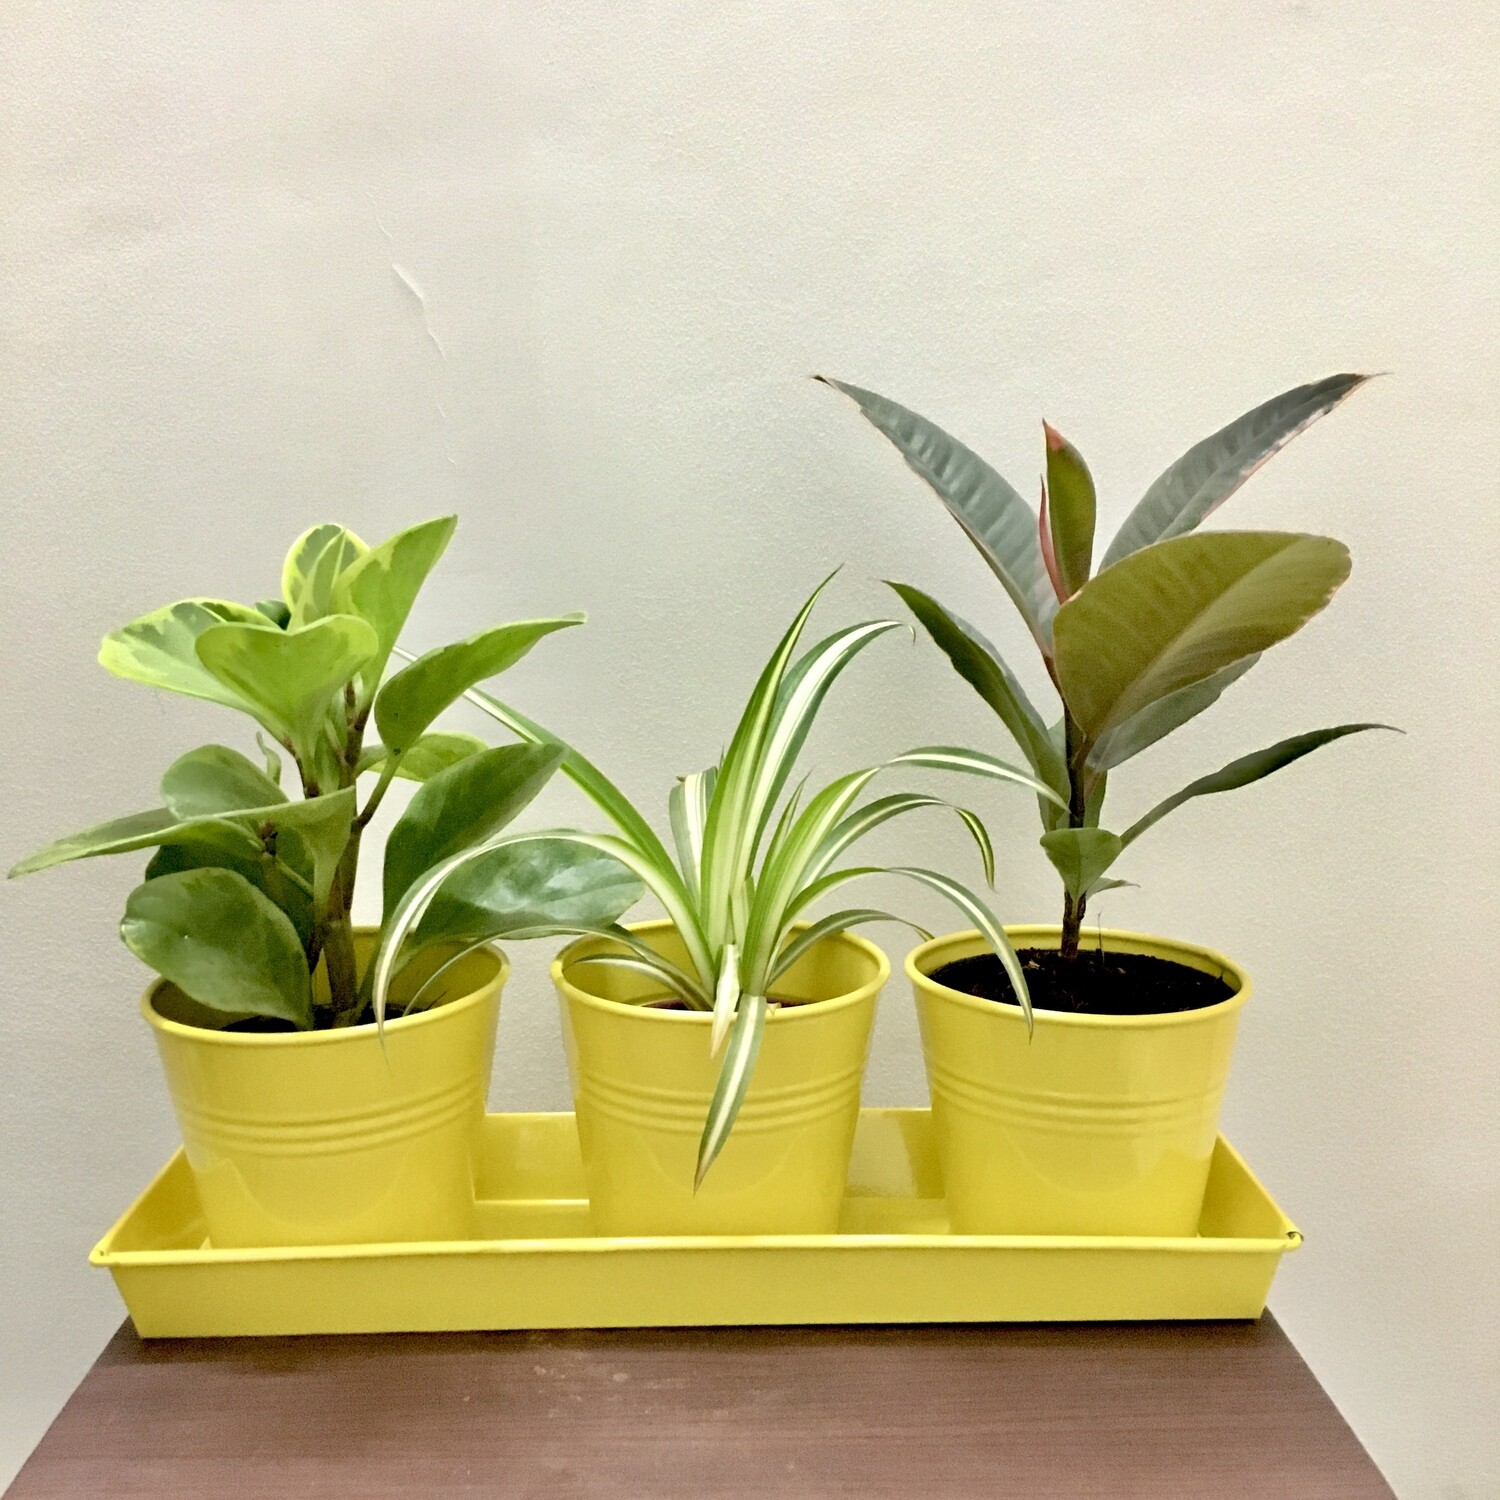 Spider Plant, Variegated Rubber Plant & Peperomia Variegated in Triplet Metal Pot with Tray